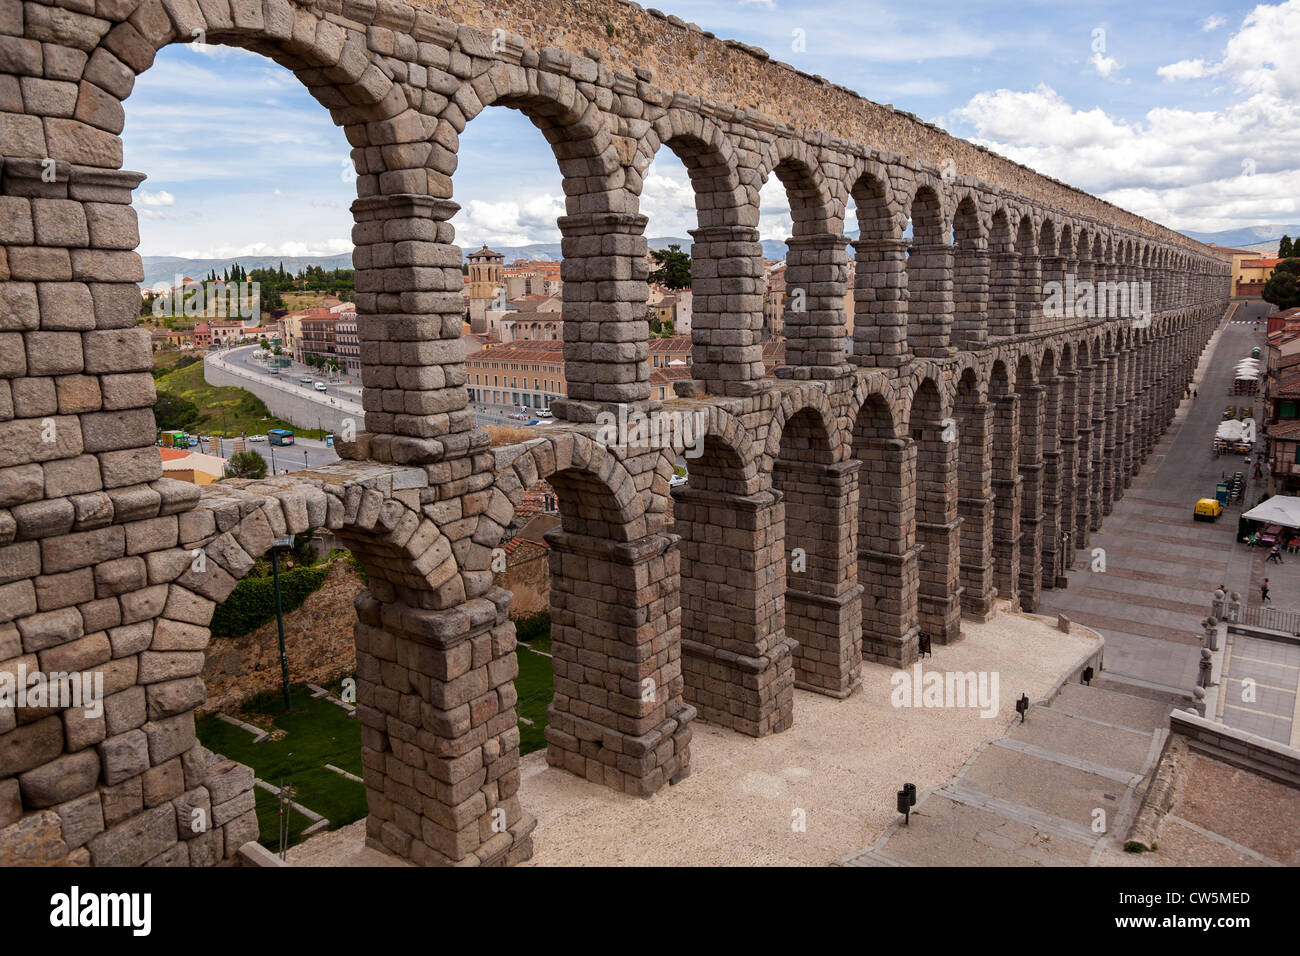 Roman aqueduct, Segovia, Spain, Europe. View of this stunning famous symbol of this UNESCO World Heritage Site. Stock Photo